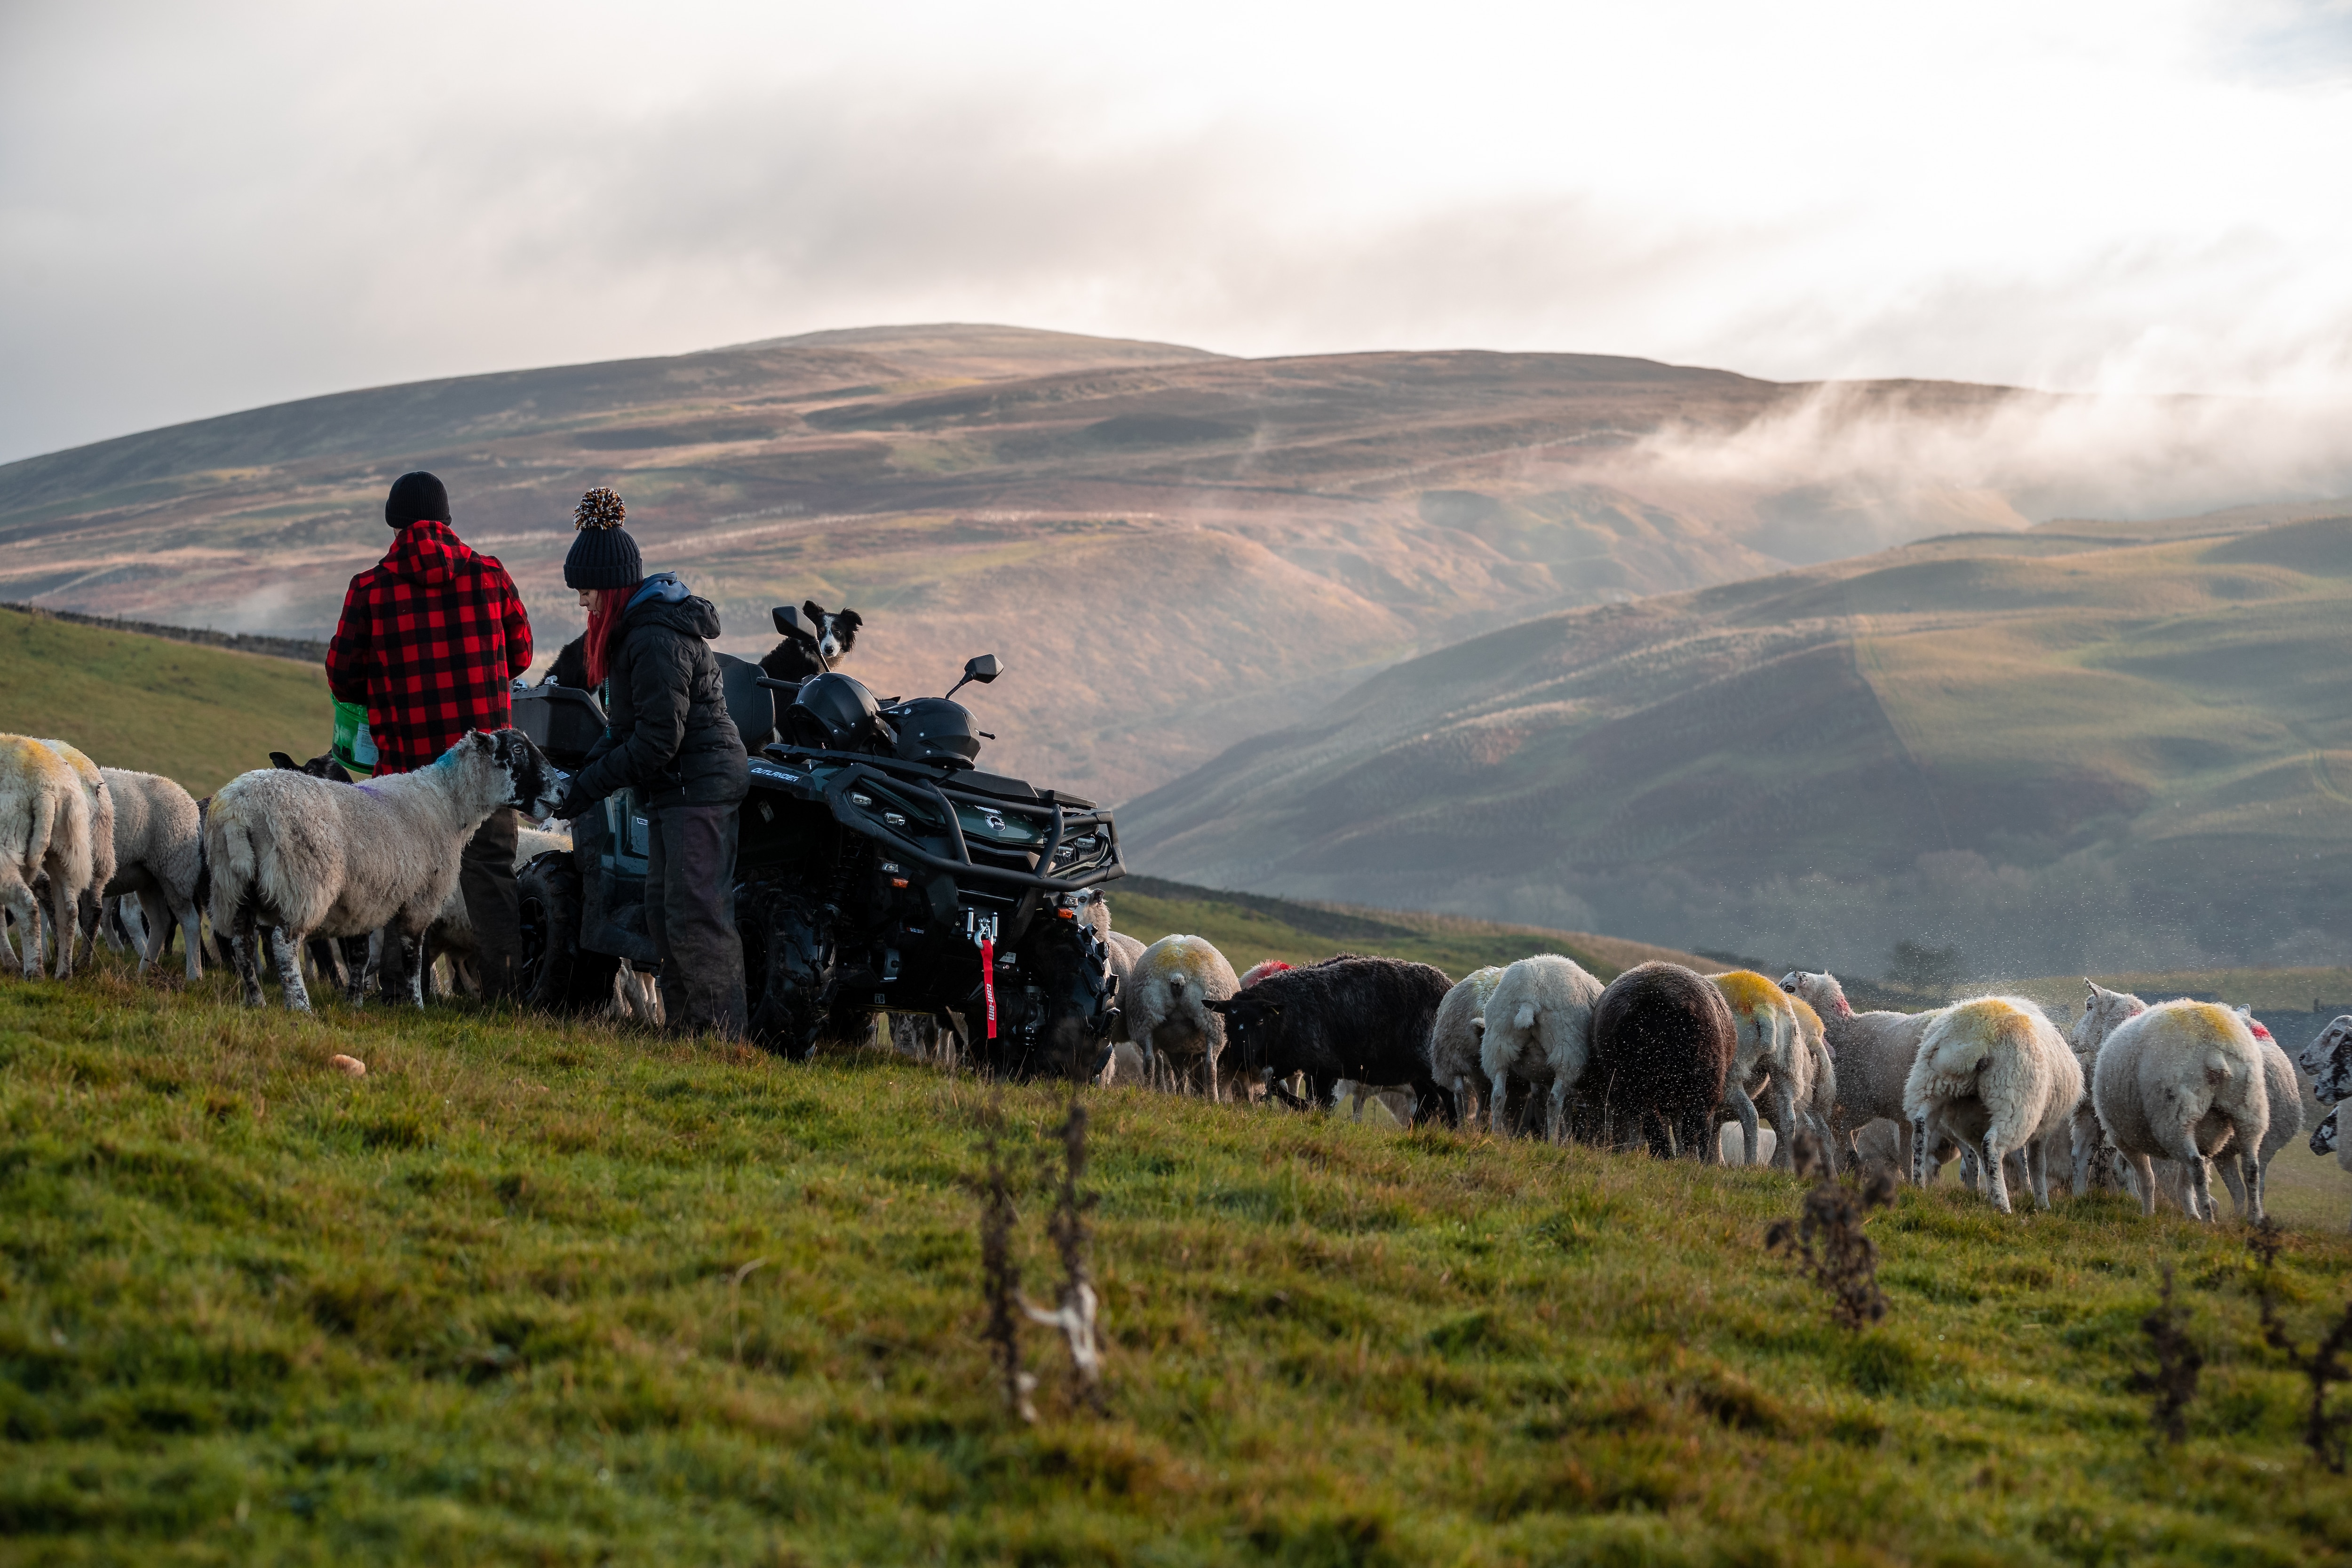 Shepherds with their flock of sheep next to Can-Am Outlander